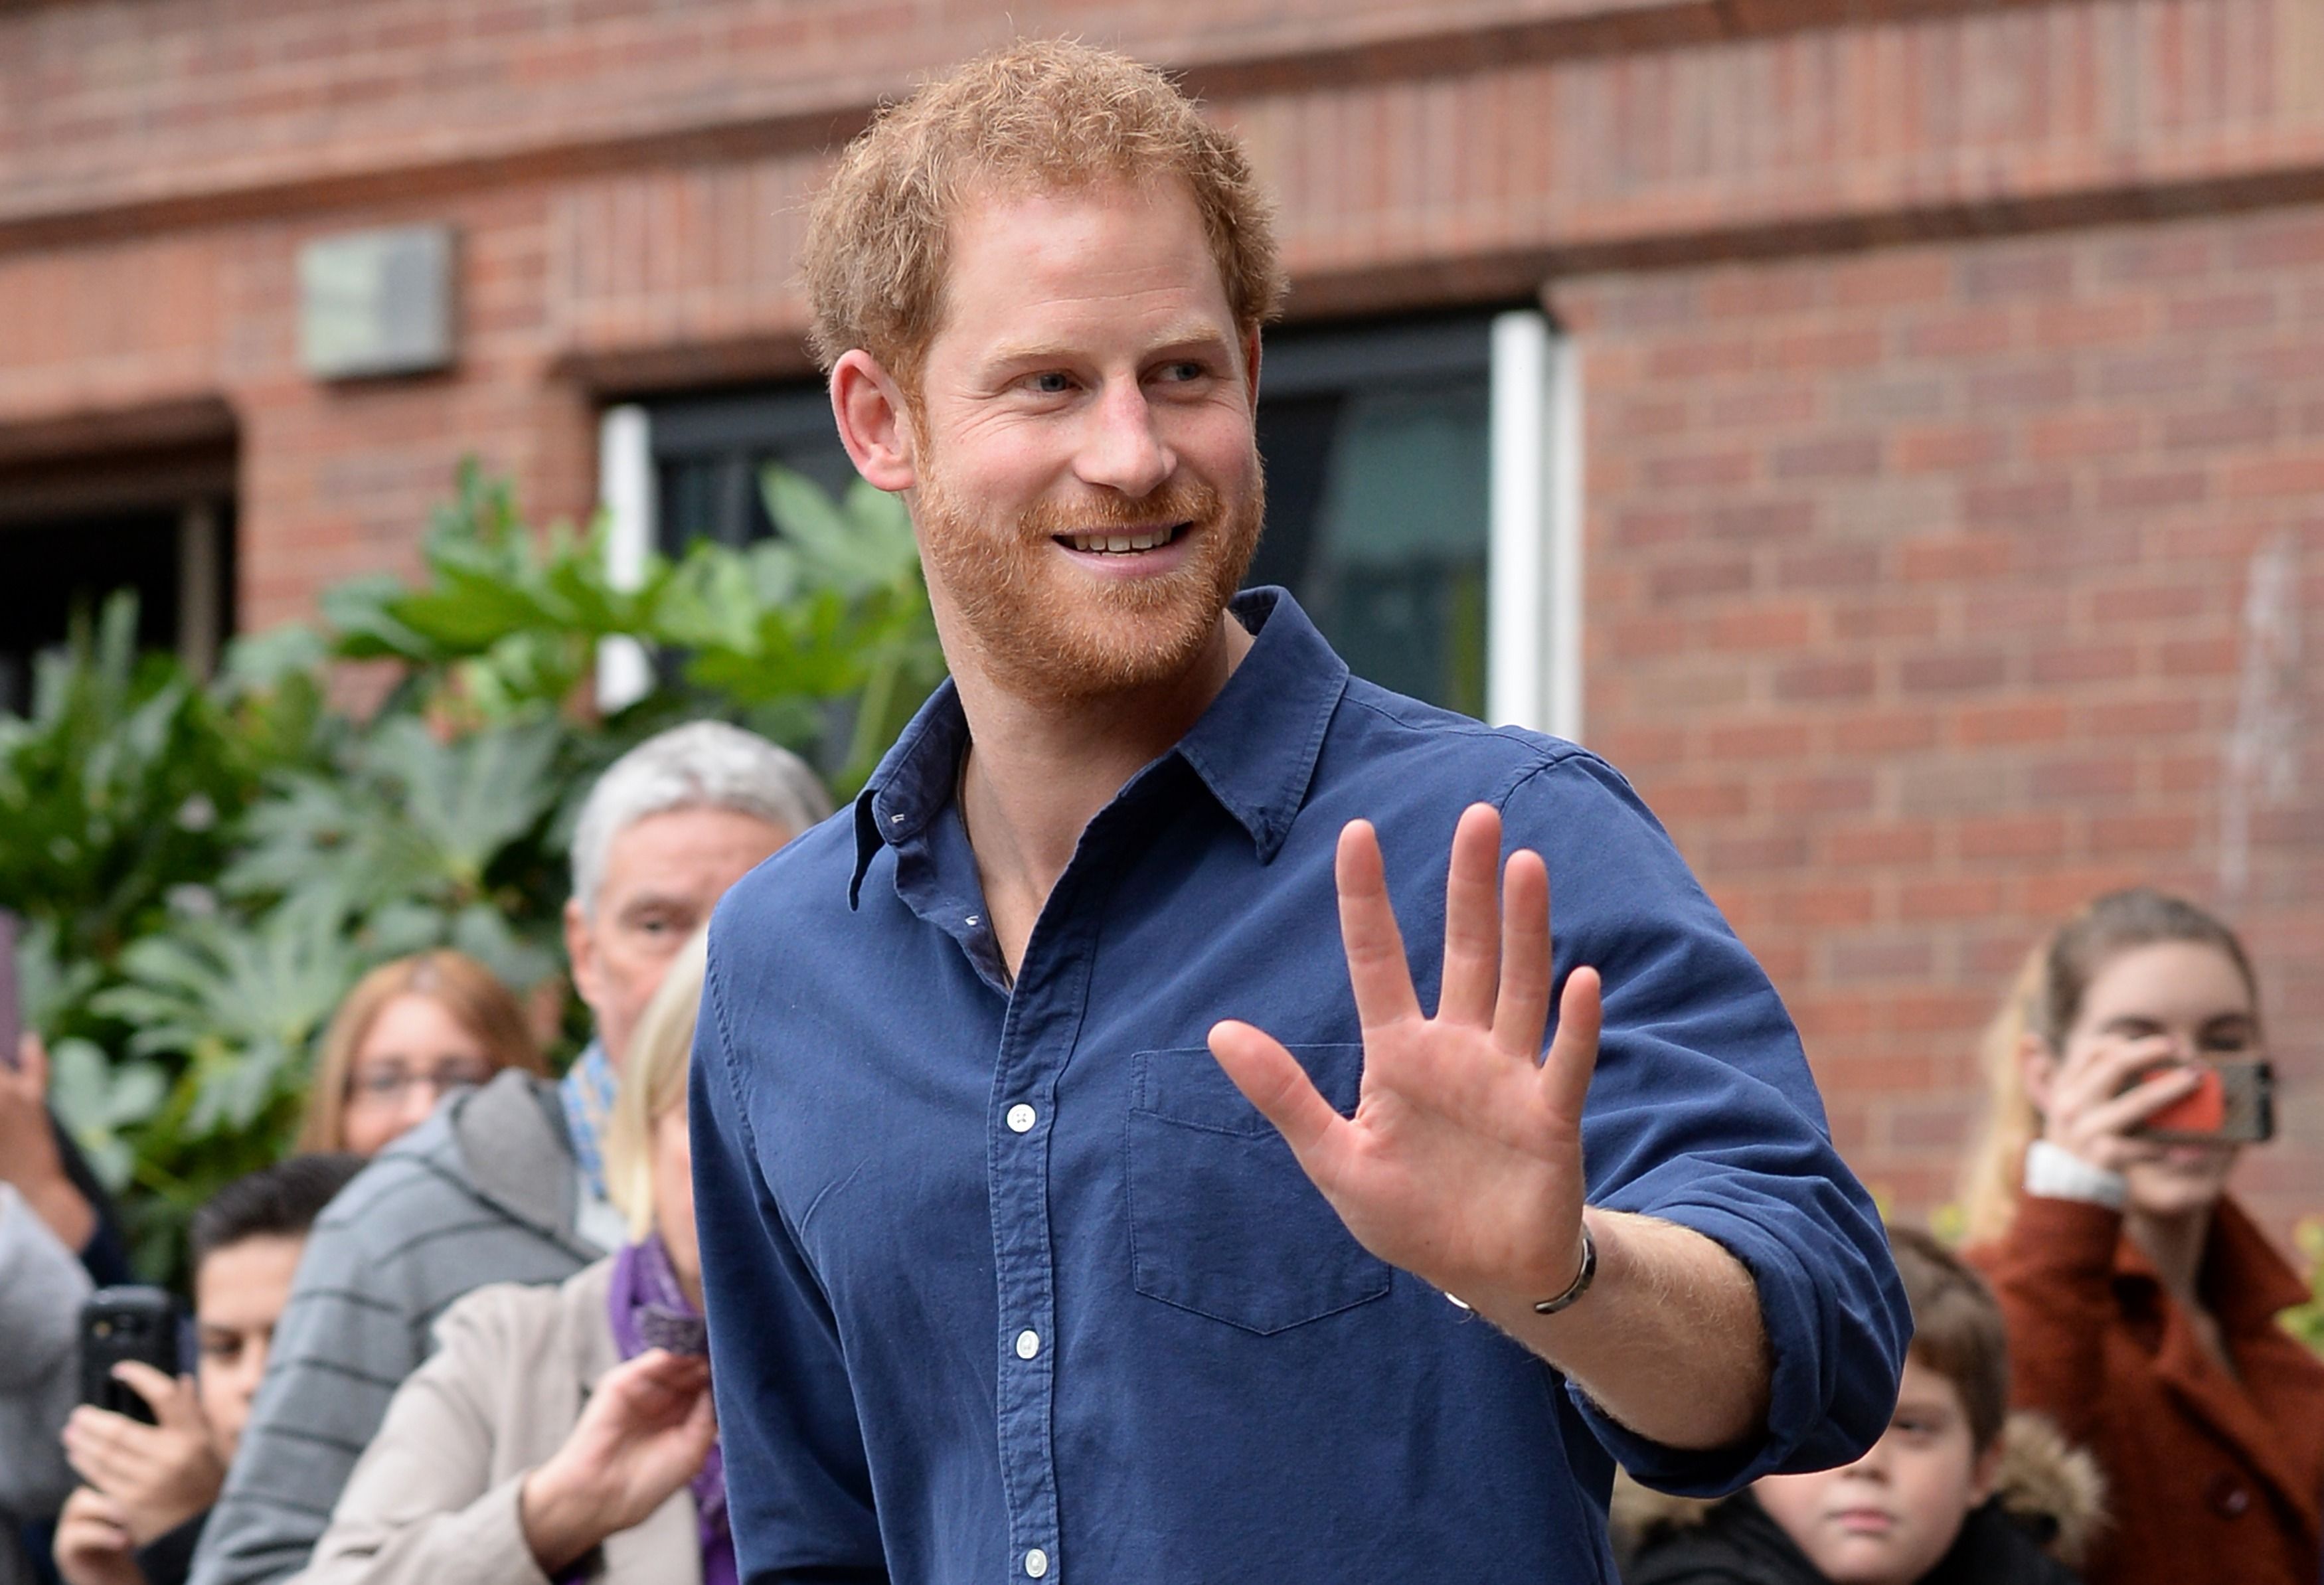 Prince Harry waved as he left Nottingham's new Central Police Station on October 26, 2016 | Photo: Getty Images